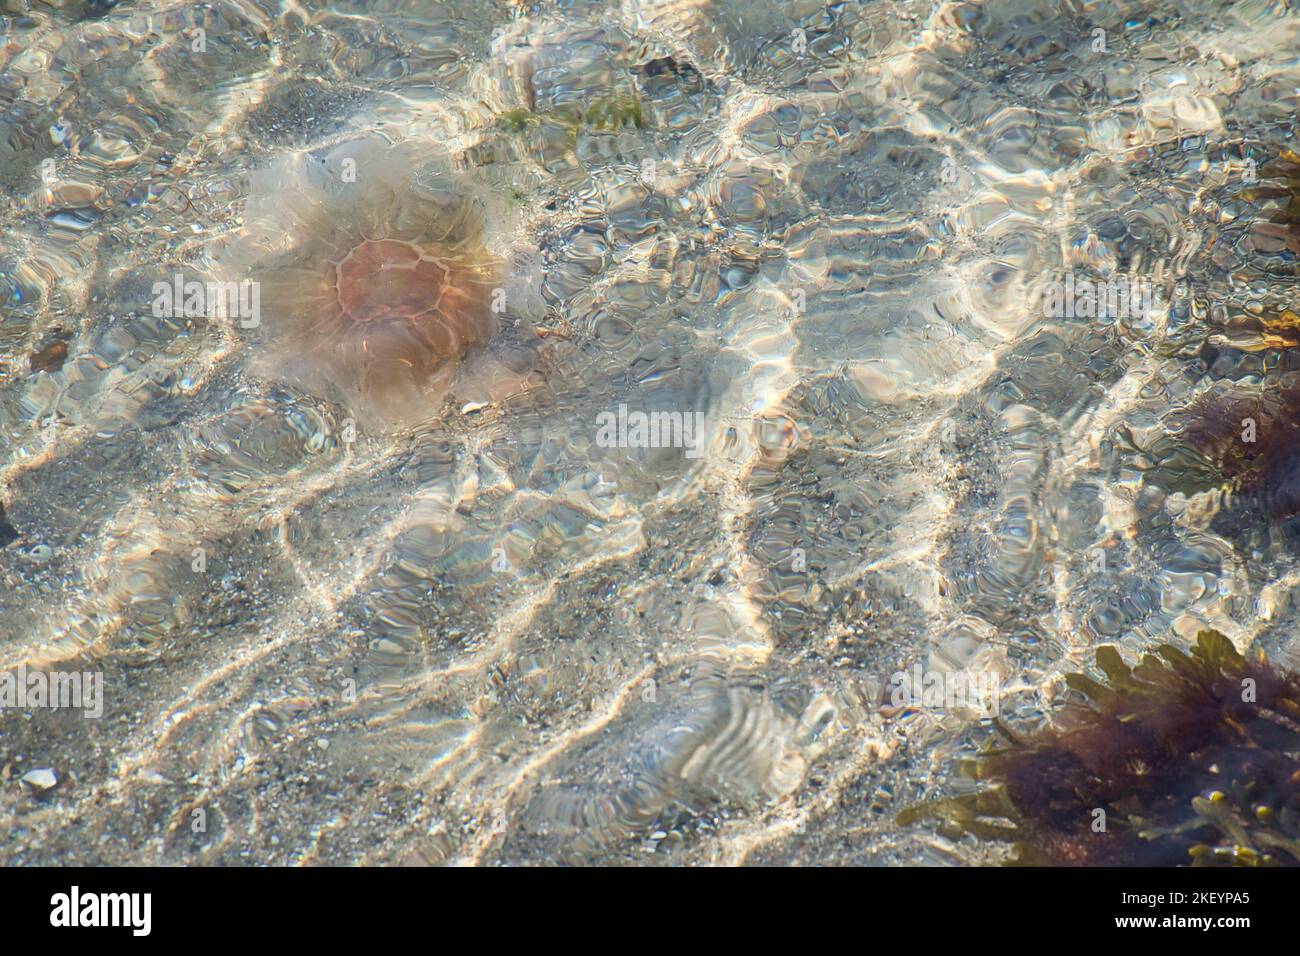 Fire jellyfish on the coast swimming in salt water. Sand in the background in waves pattern. Animal photo from nature Stock Photo